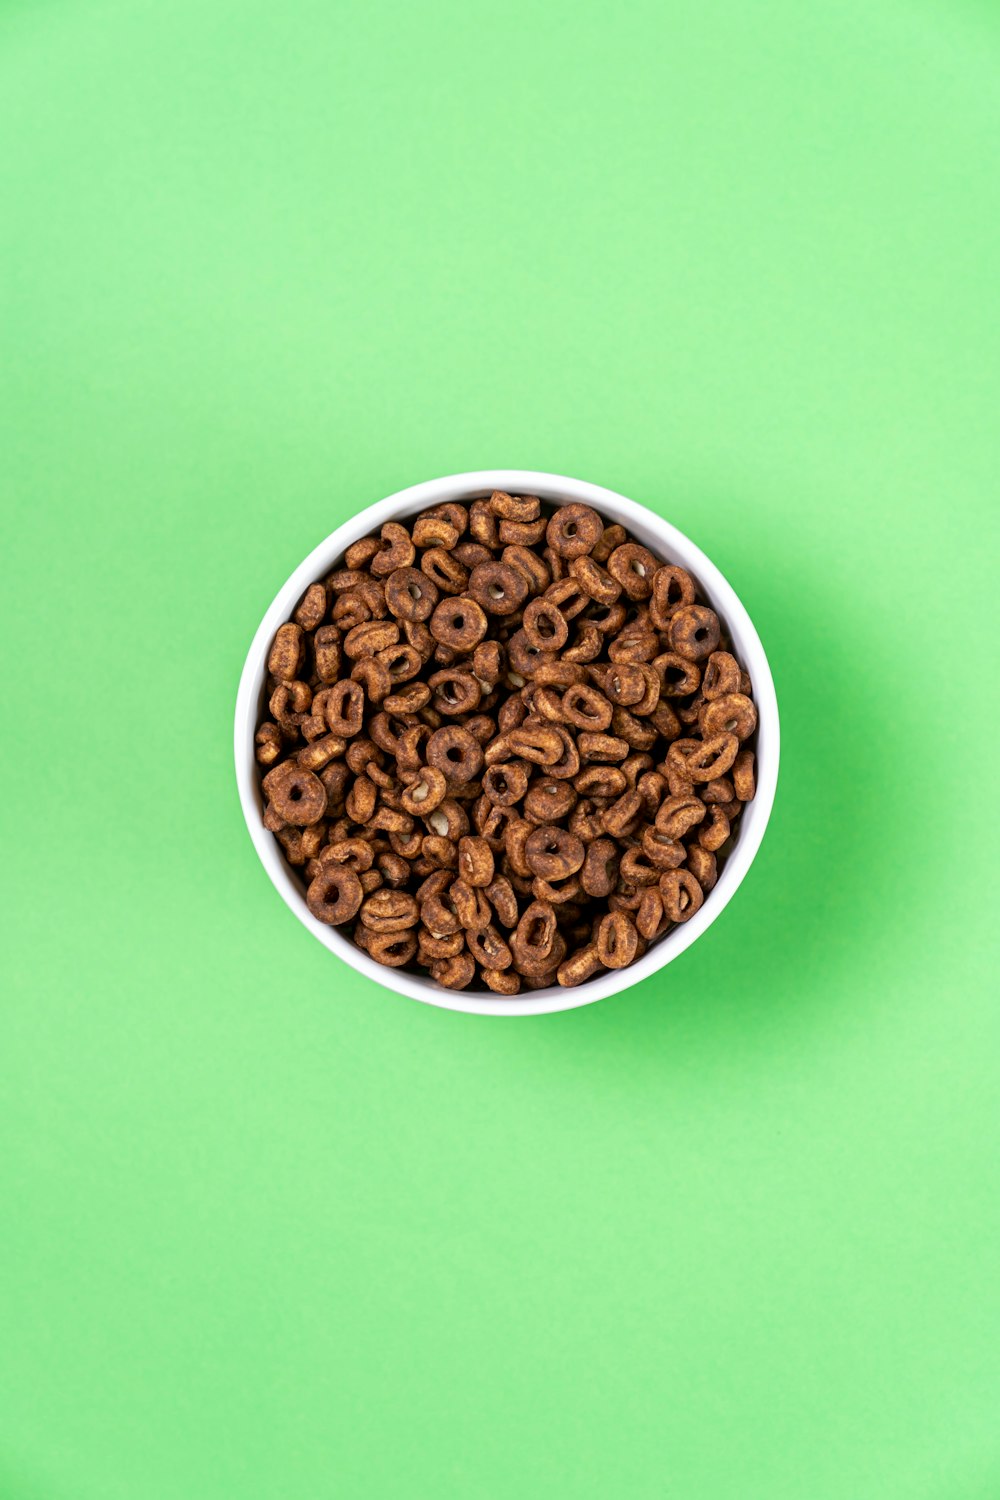 a bowl of cereal on a green background